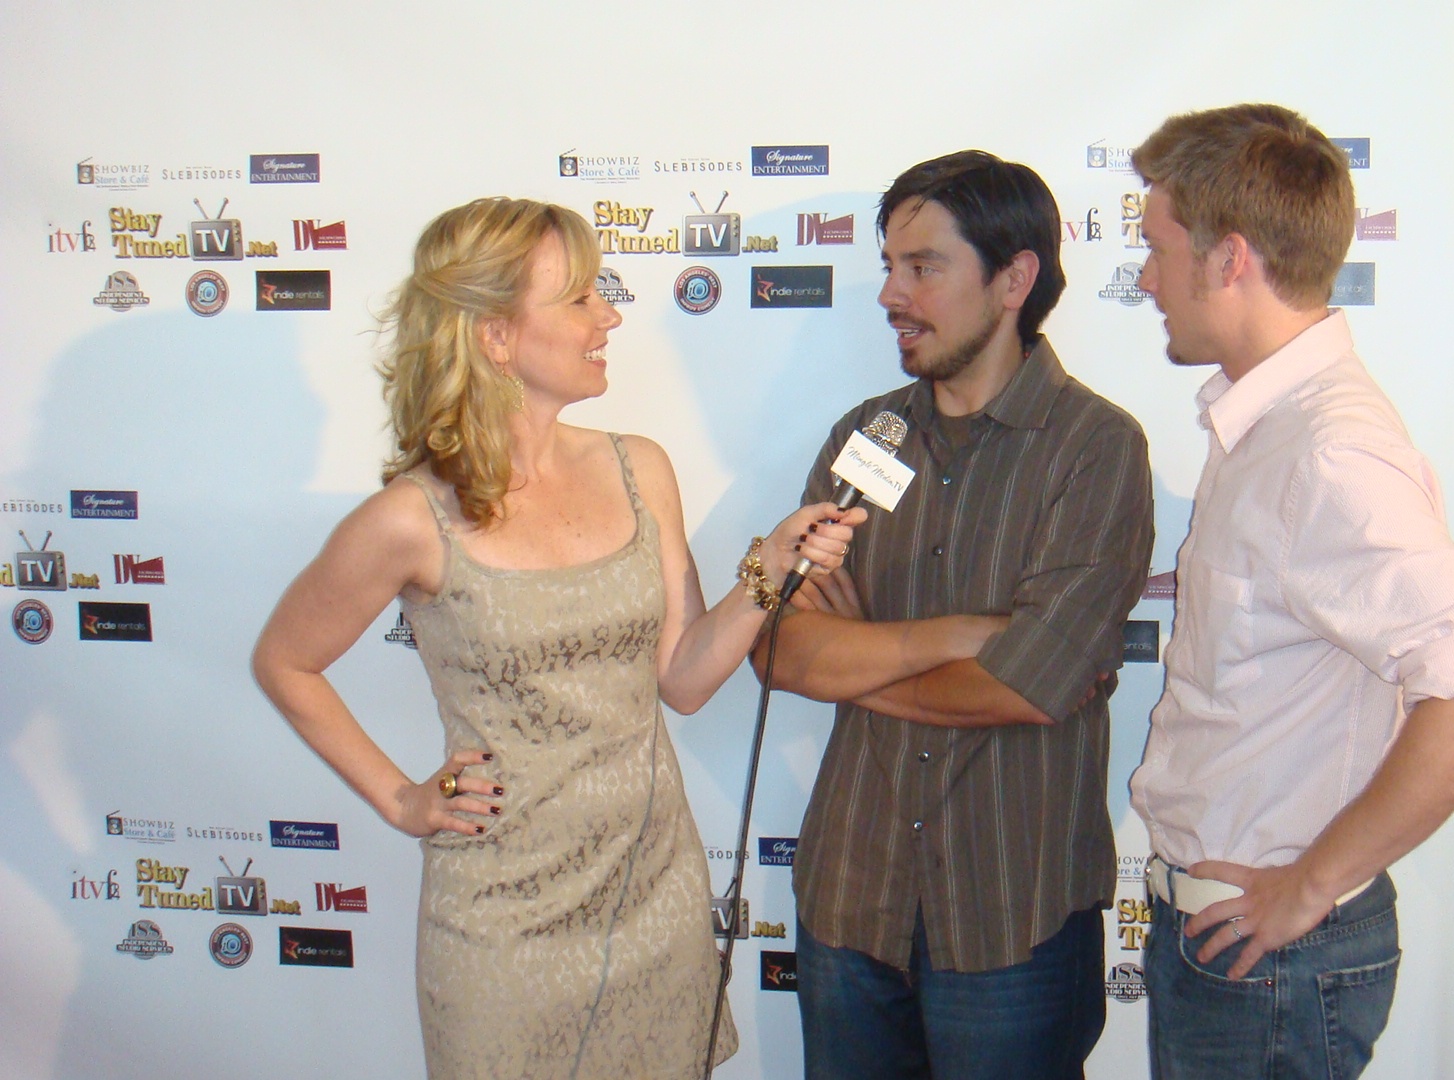 At the 2010 STTV Awards. Alex was Nominated for Best Actor in a Comedy.